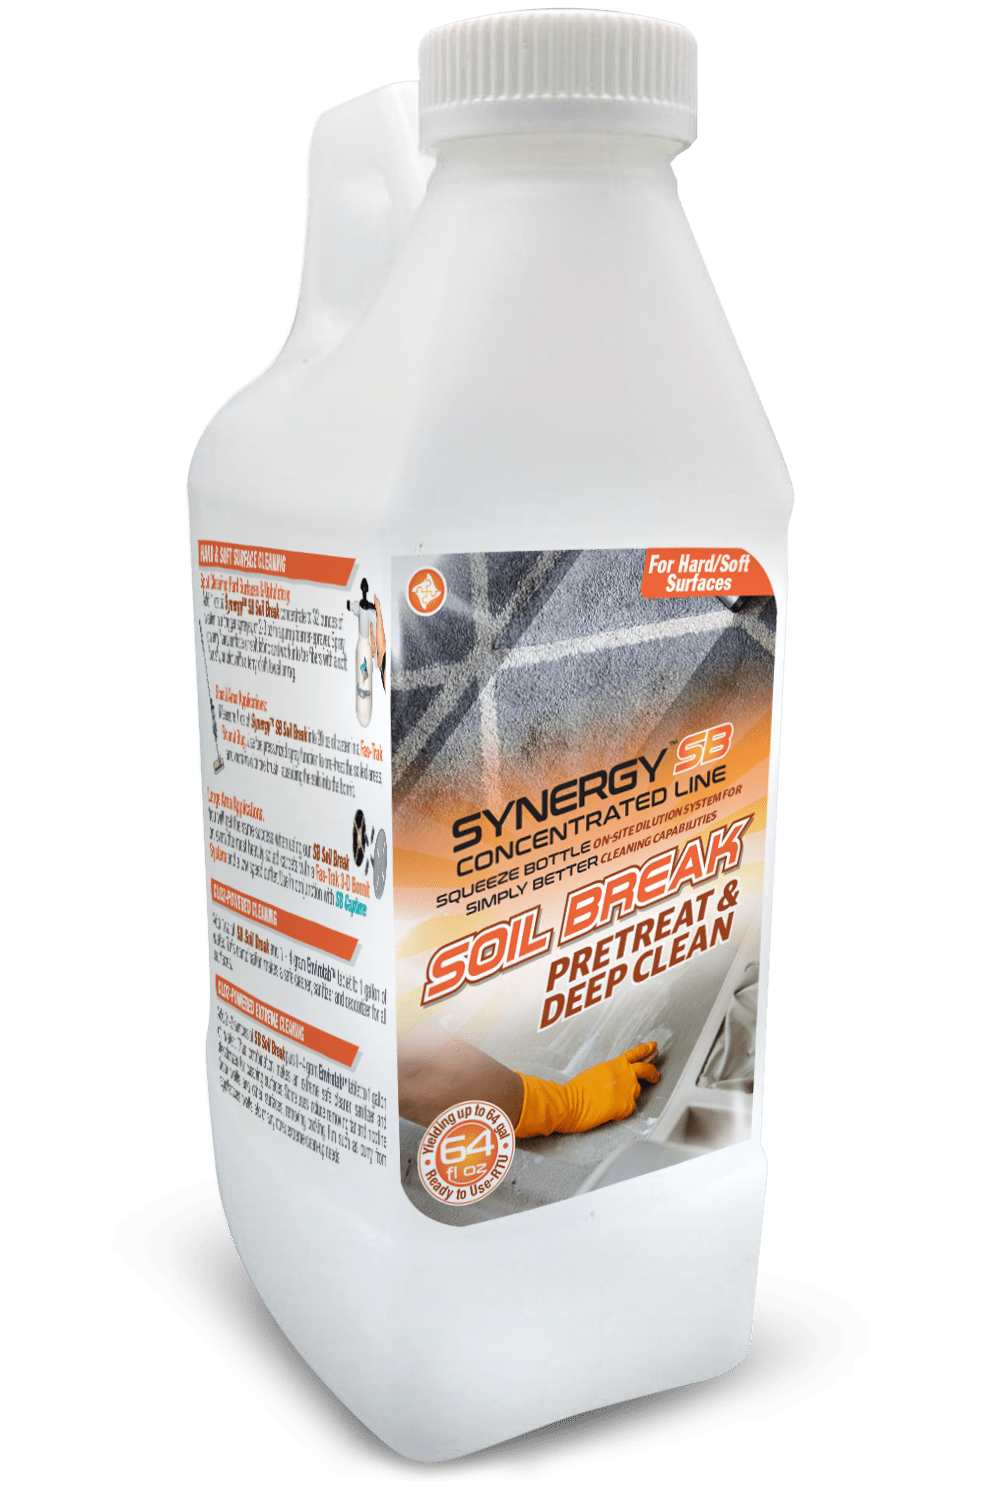 Soil Break Cleaning Concentrate & Laundry Detergent